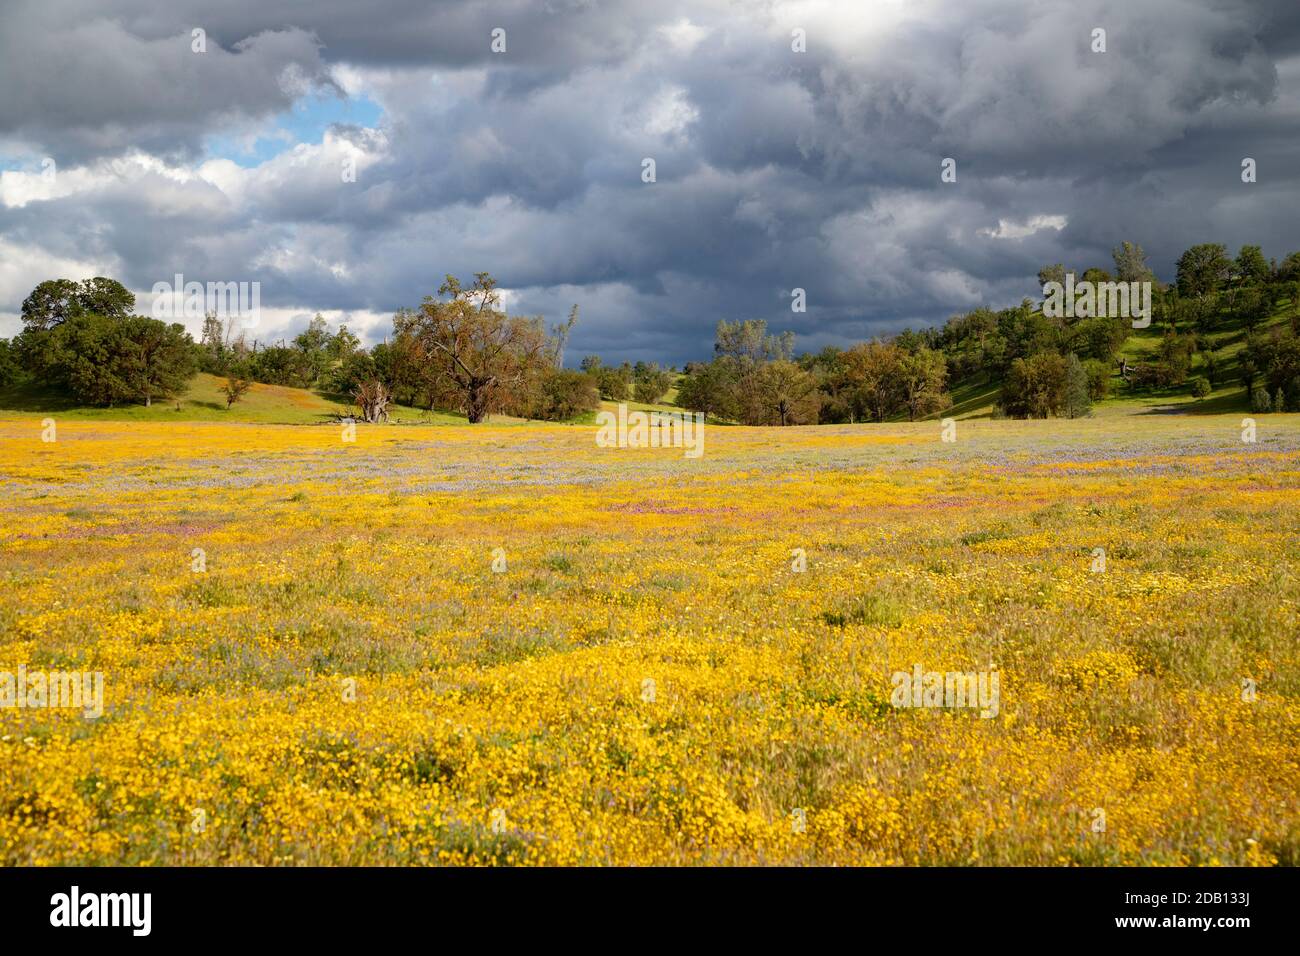 Striking meadown of colorful gold, yellow, and lavender wildflowers with woodlands behind and stormy skies above Stock Photo